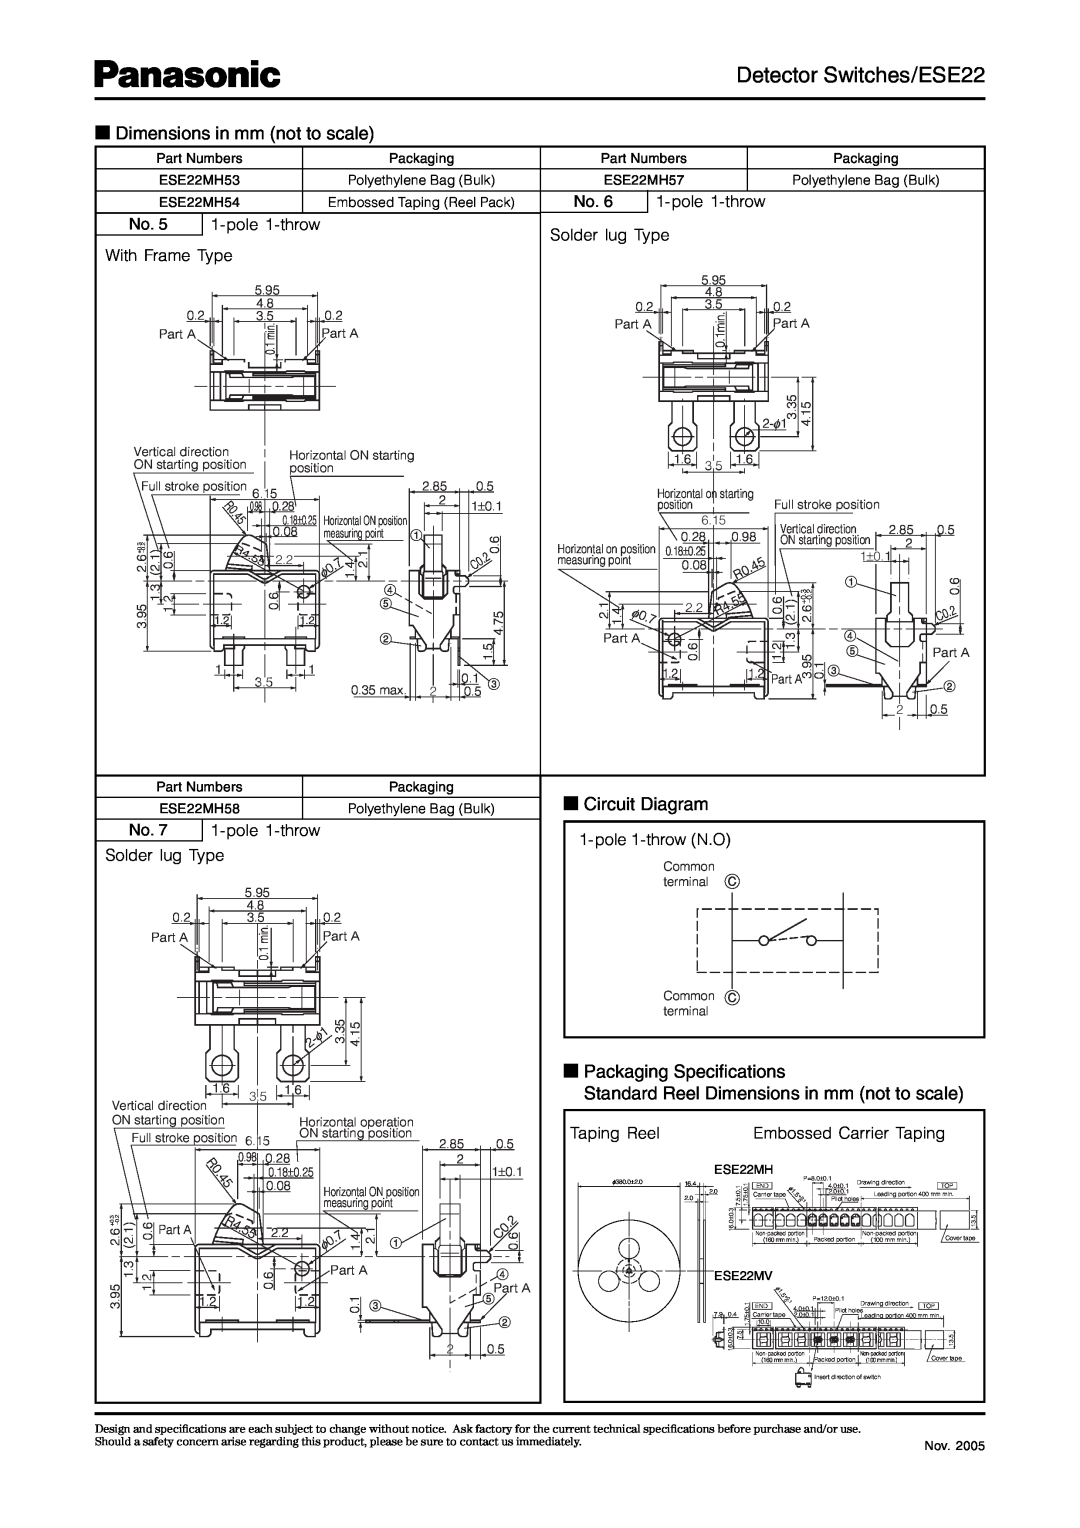 Panasonic ESE22 Circuit Diagram, Packaging Speciﬁcations Standard Reel Dimensions in mm not to scale, Taping Reel 